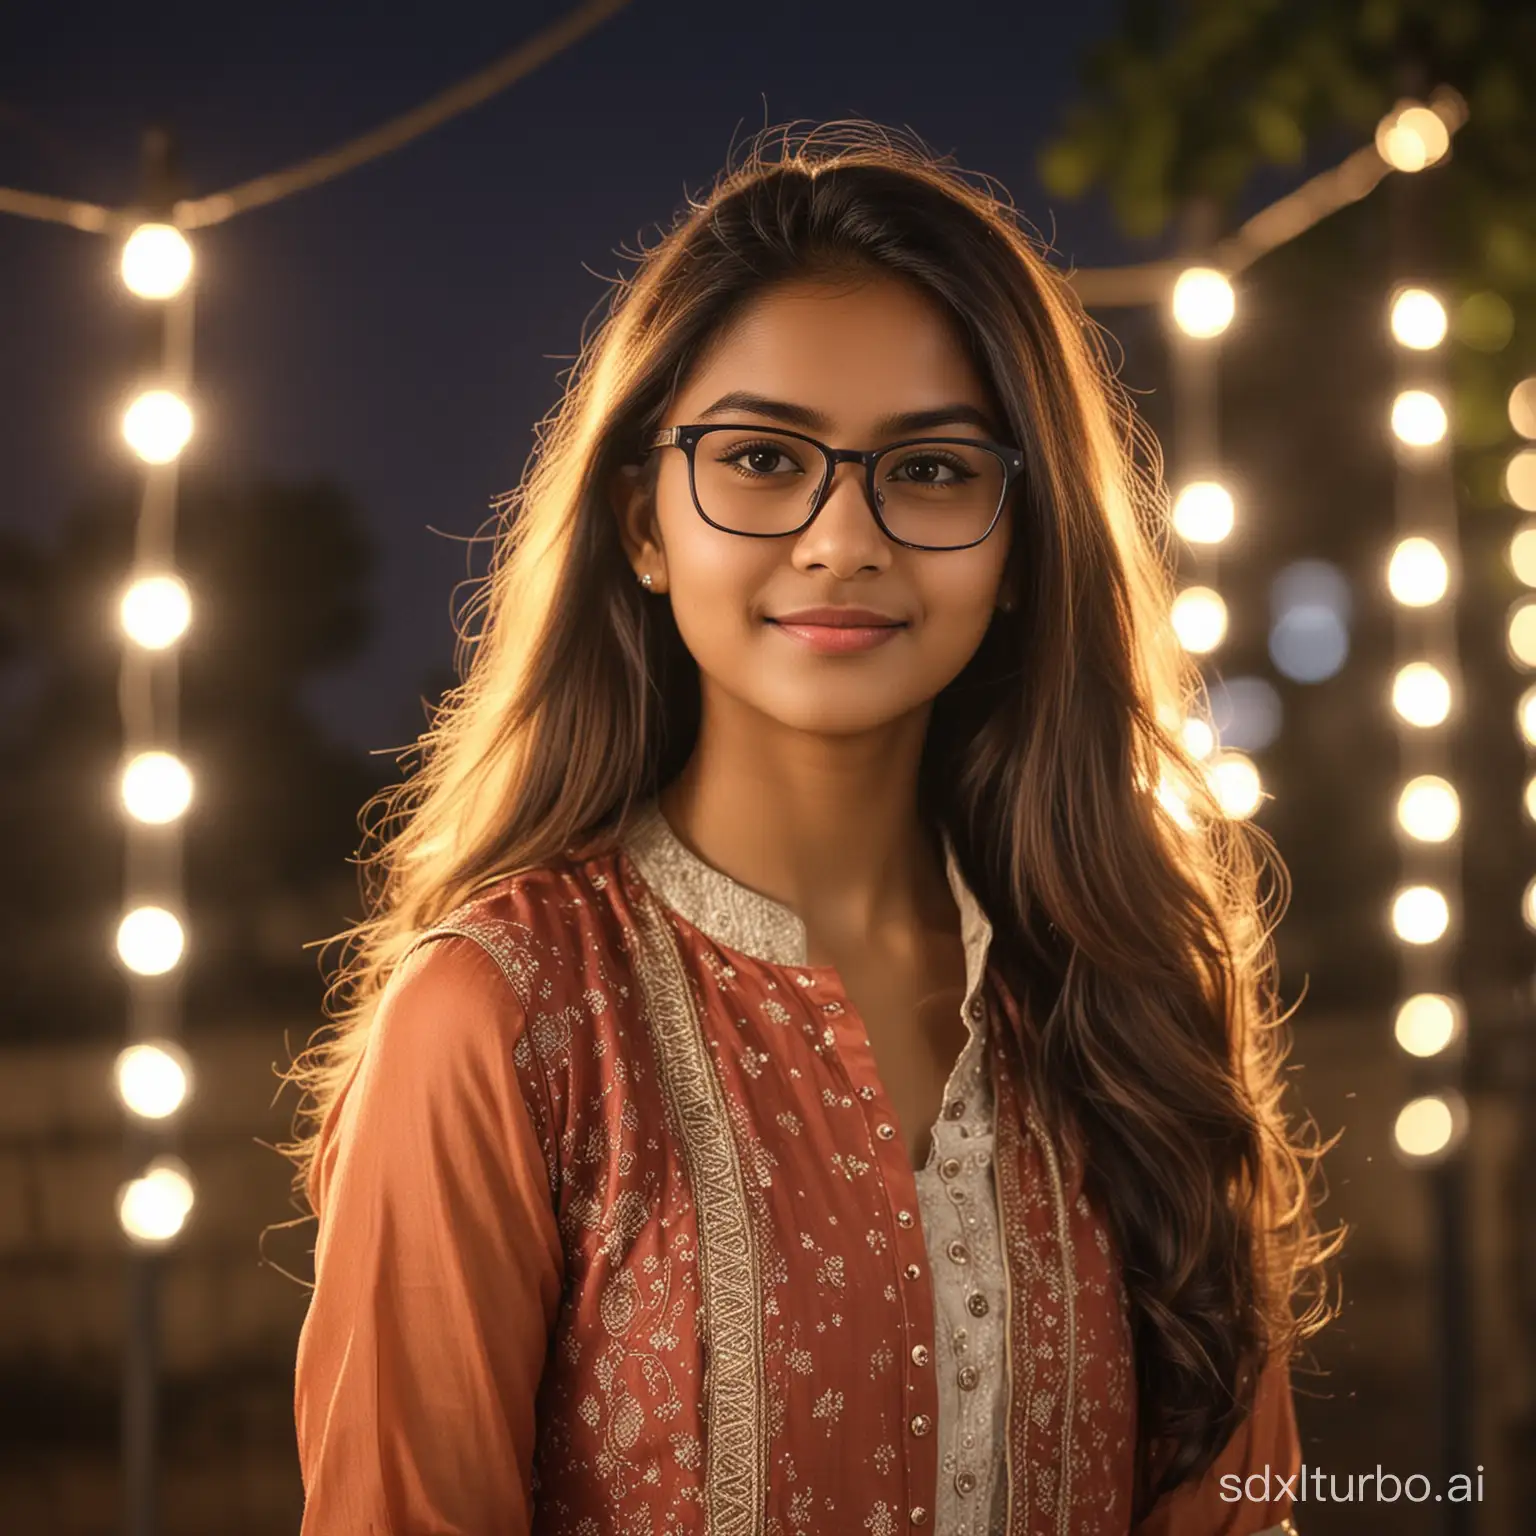 a girl age 16 yrs in indo-western clothes with a background of lights in an open place with soft and silky hair with specs